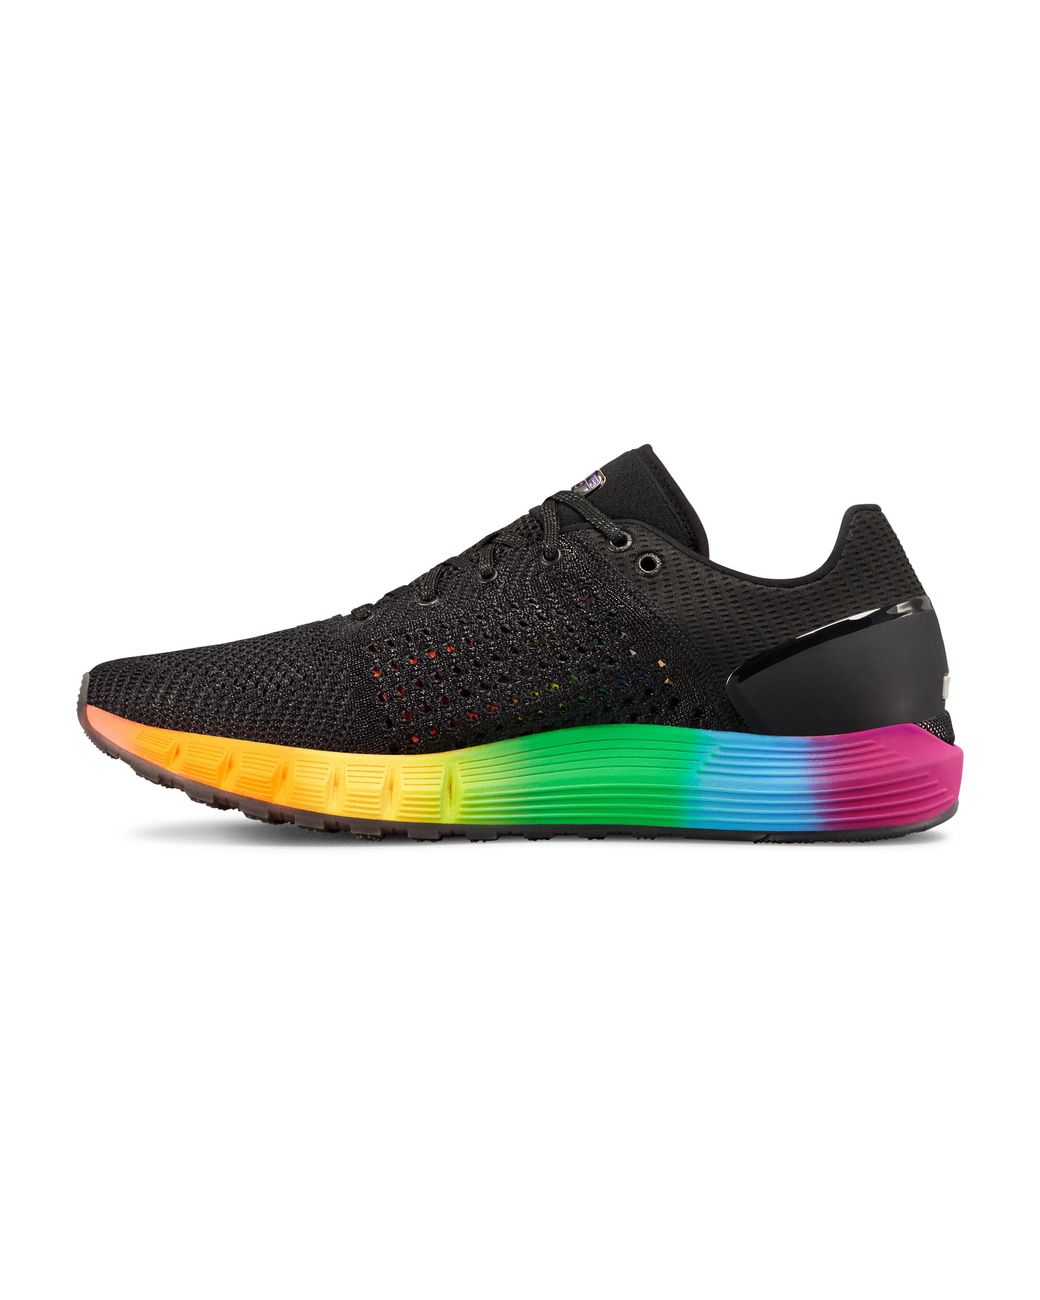 Under Armour Rainbow Athletic Shoes for Men